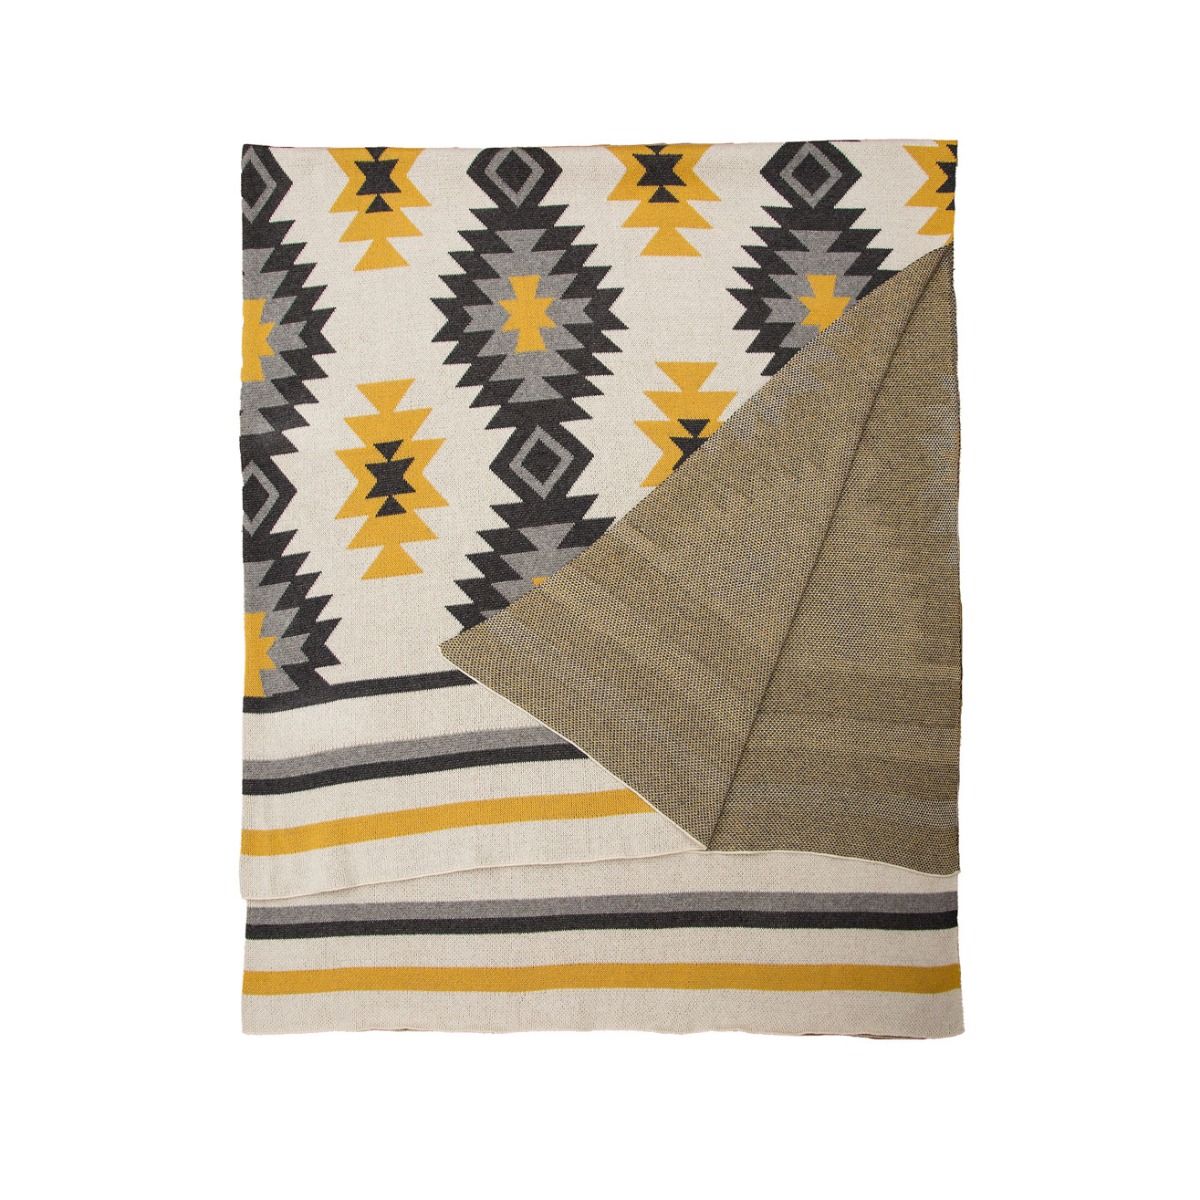 Cooly-Wooly Aztec Print Throw - Rustic Furniture Outlet